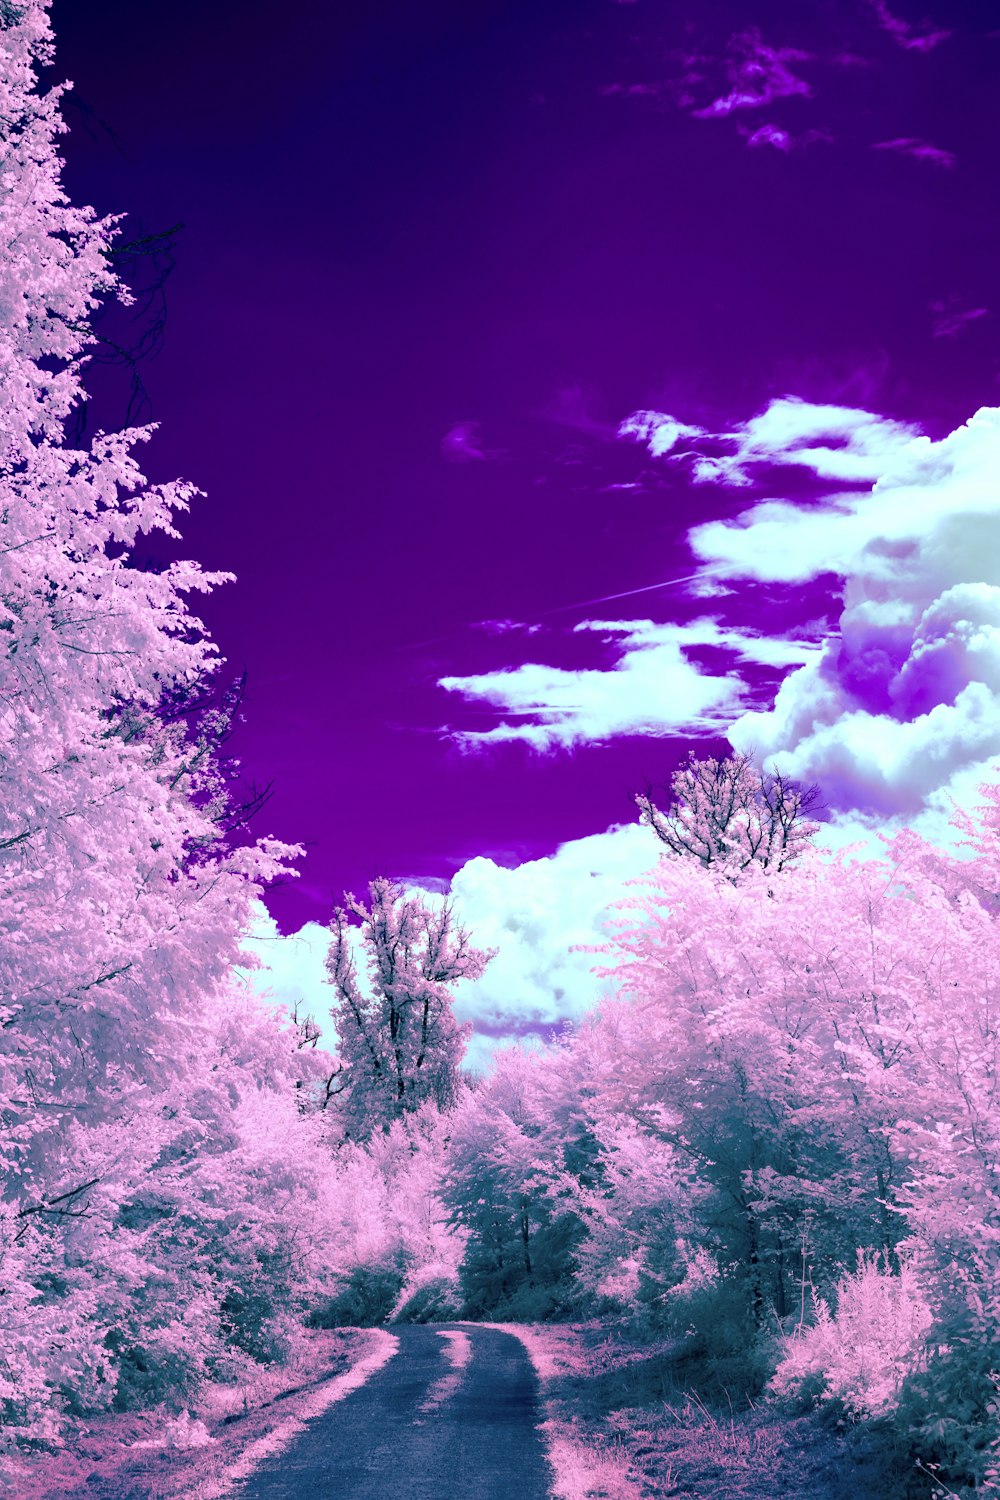 a road surrounded by trees with a purple sky in the background